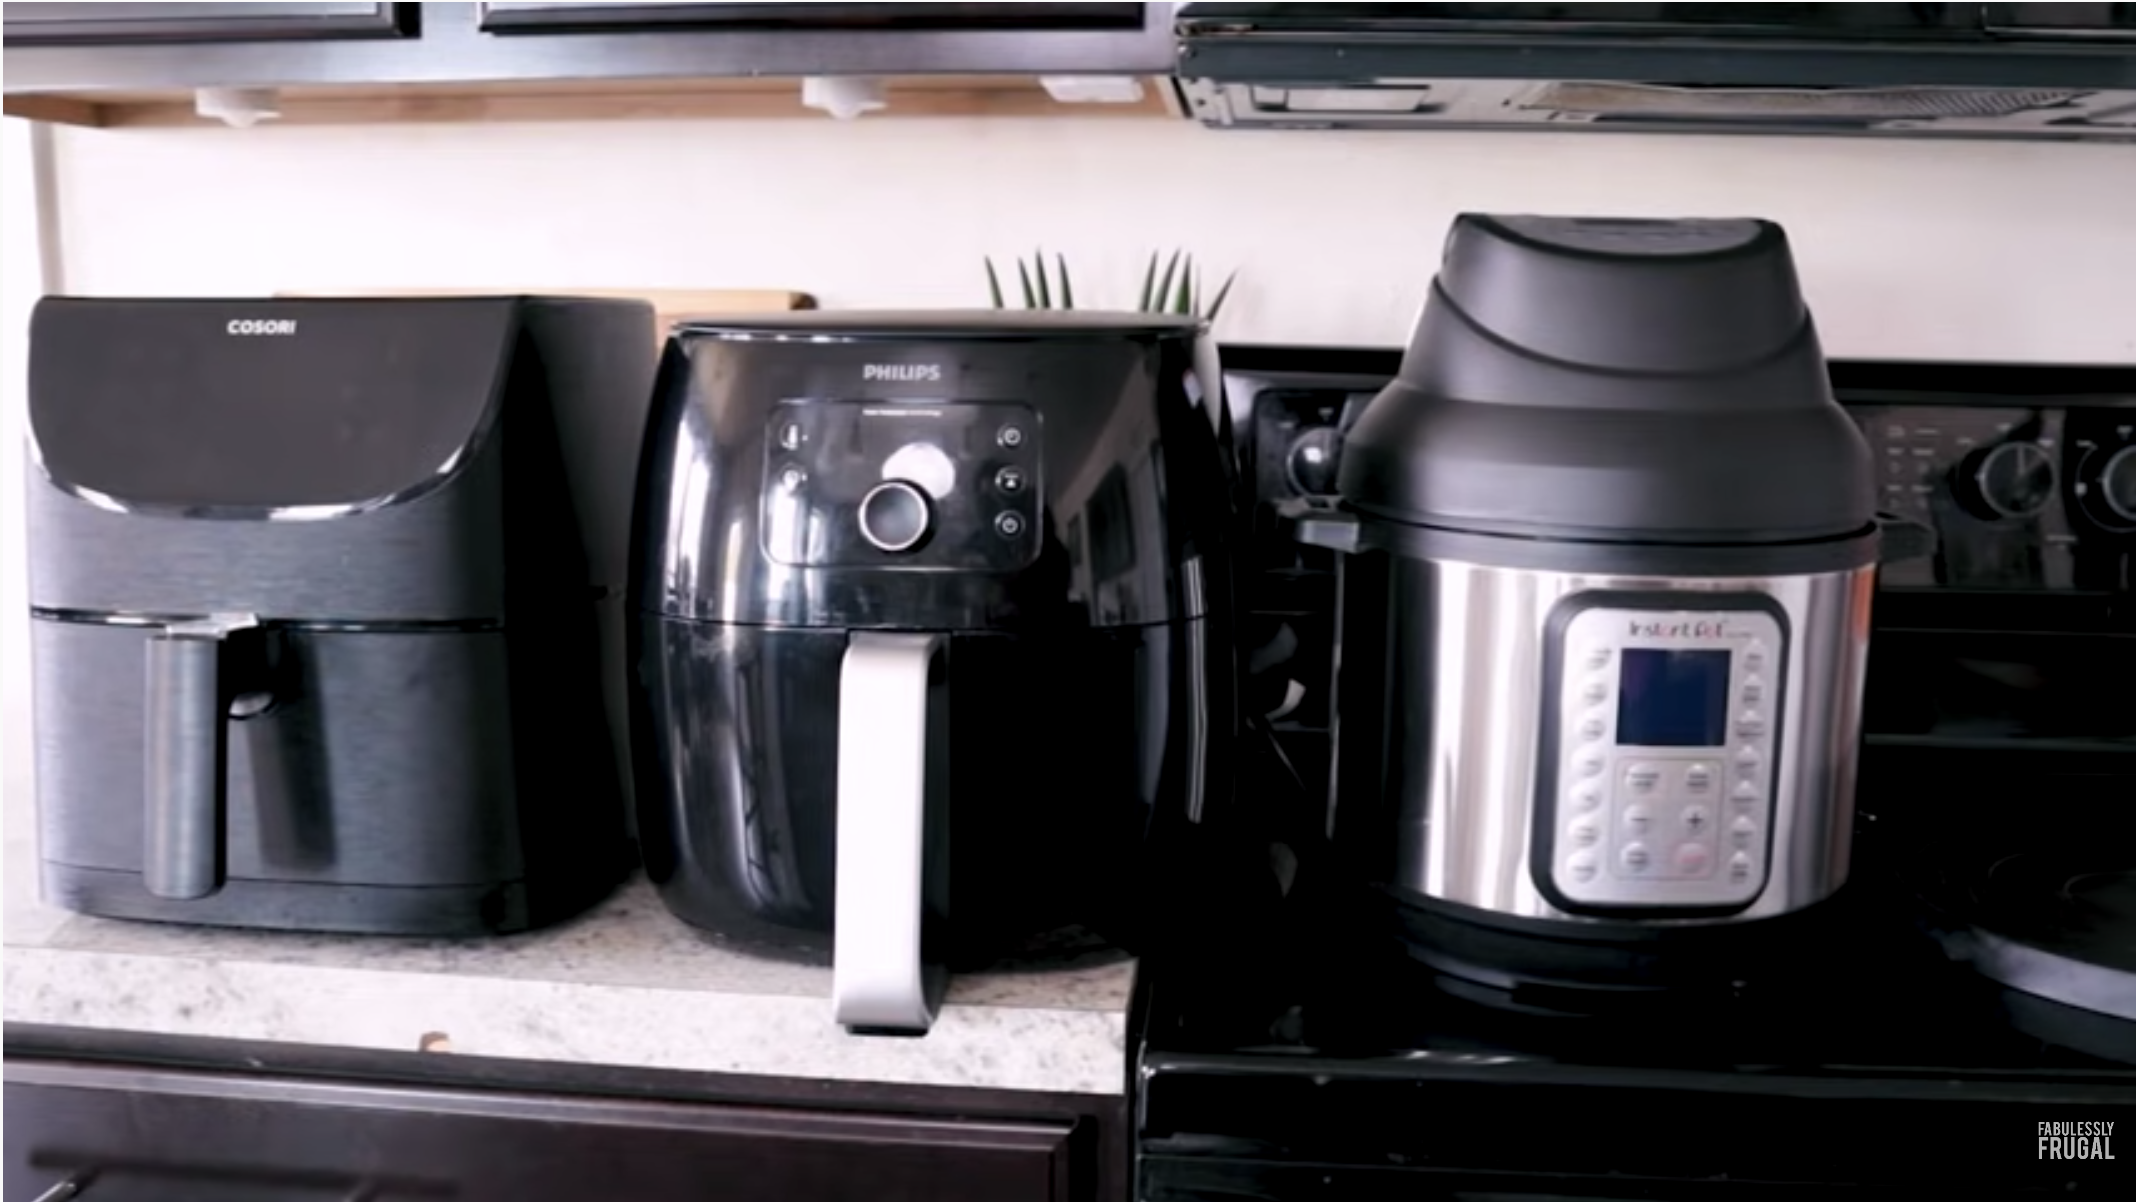 The Best Air Fryer Accessories and What To Do With Them - Fabulessly Frugal